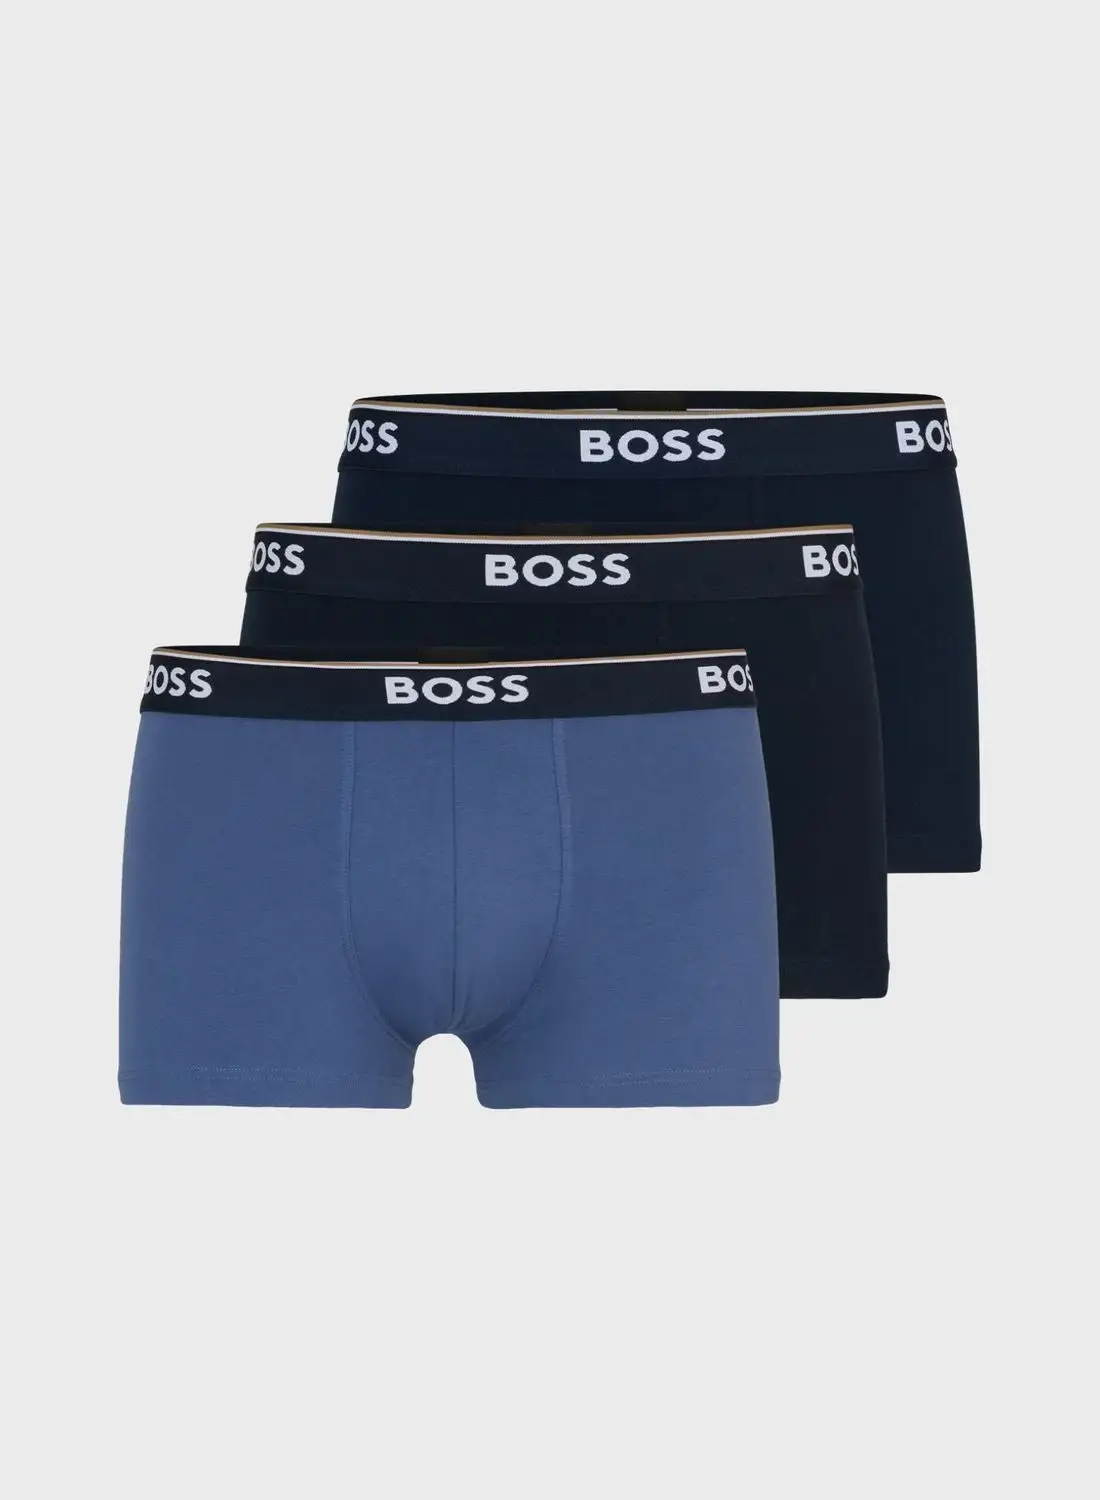 BOSS 3 Pack Assorted Boxers